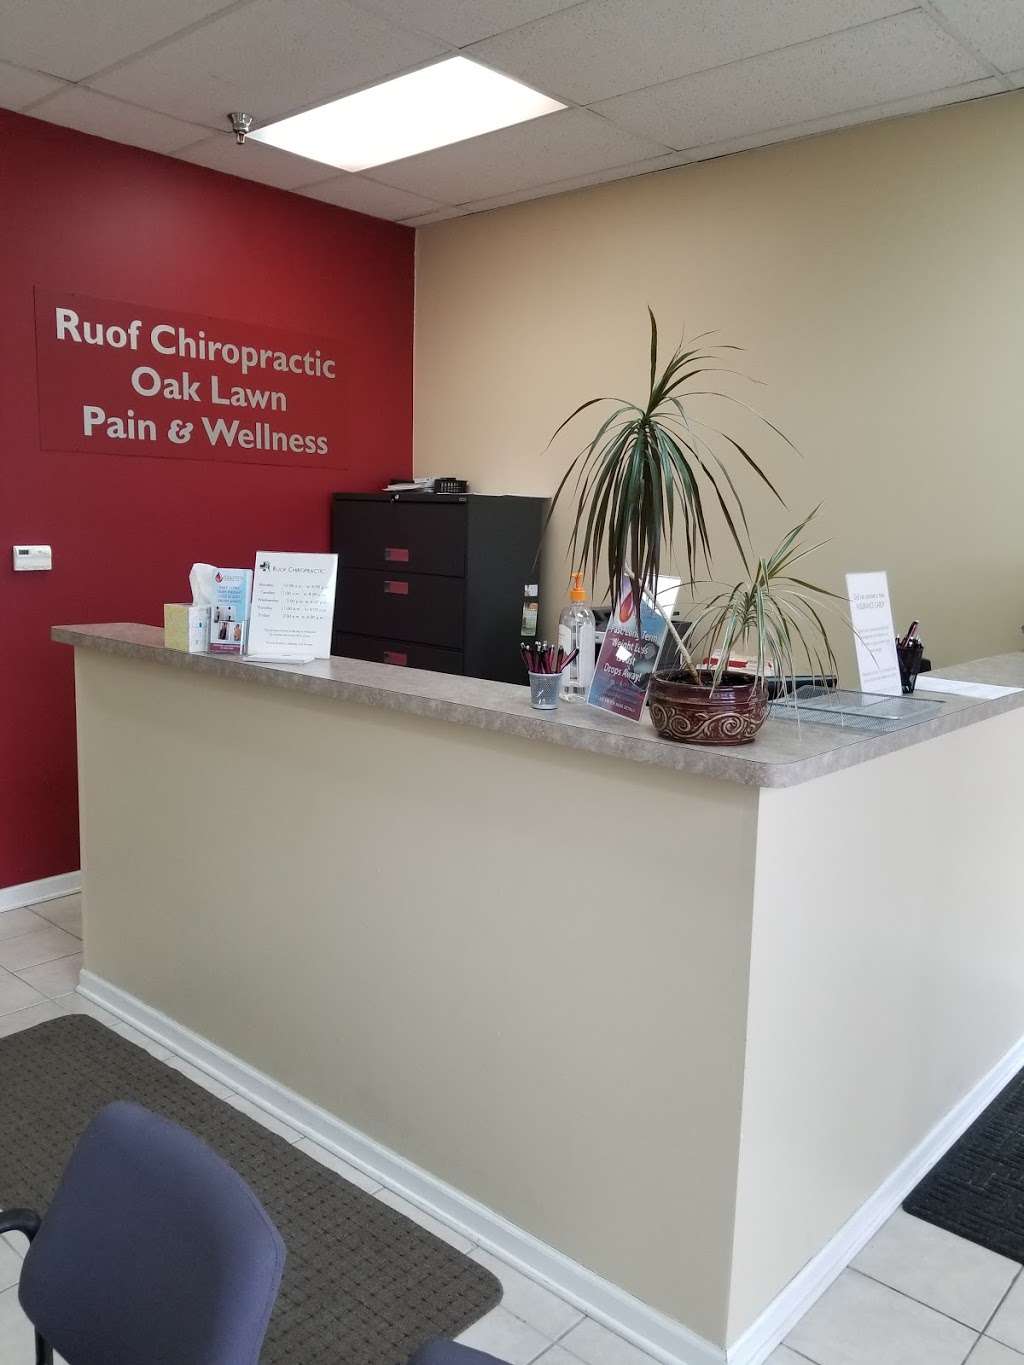 Ruof Chiropractic | 10250 Central Ave, Oak Lawn, IL 60453 | Phone: (708) 423-1440